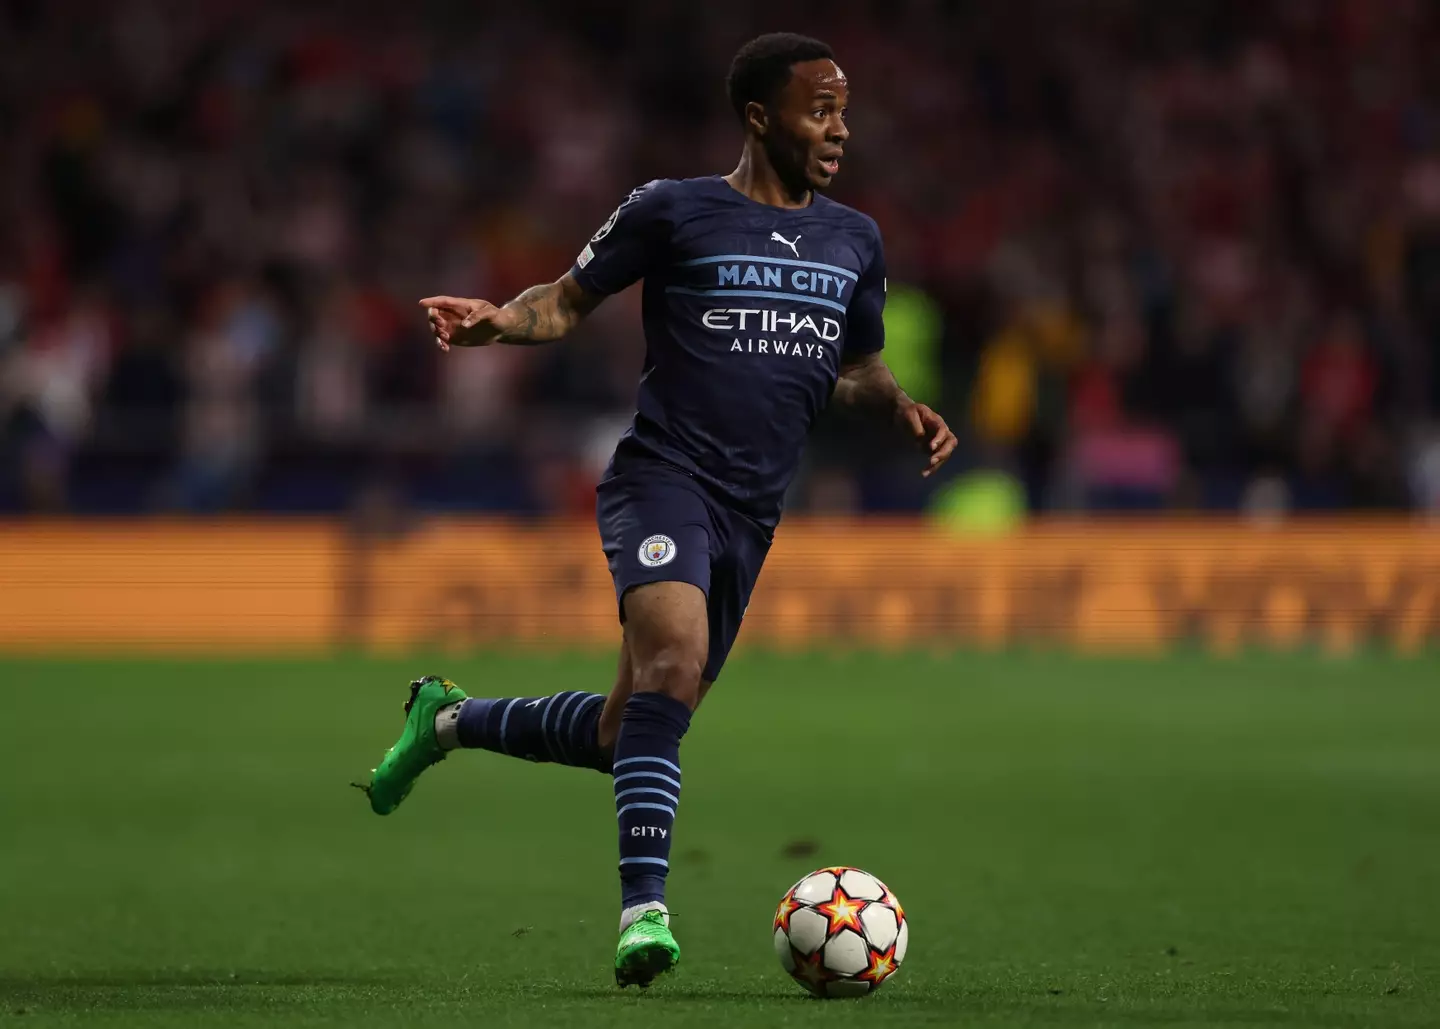 Raheem Sterling in action against Atletico Madrid for Manchester City in the Champions League quarter-final (Image: Alamy)